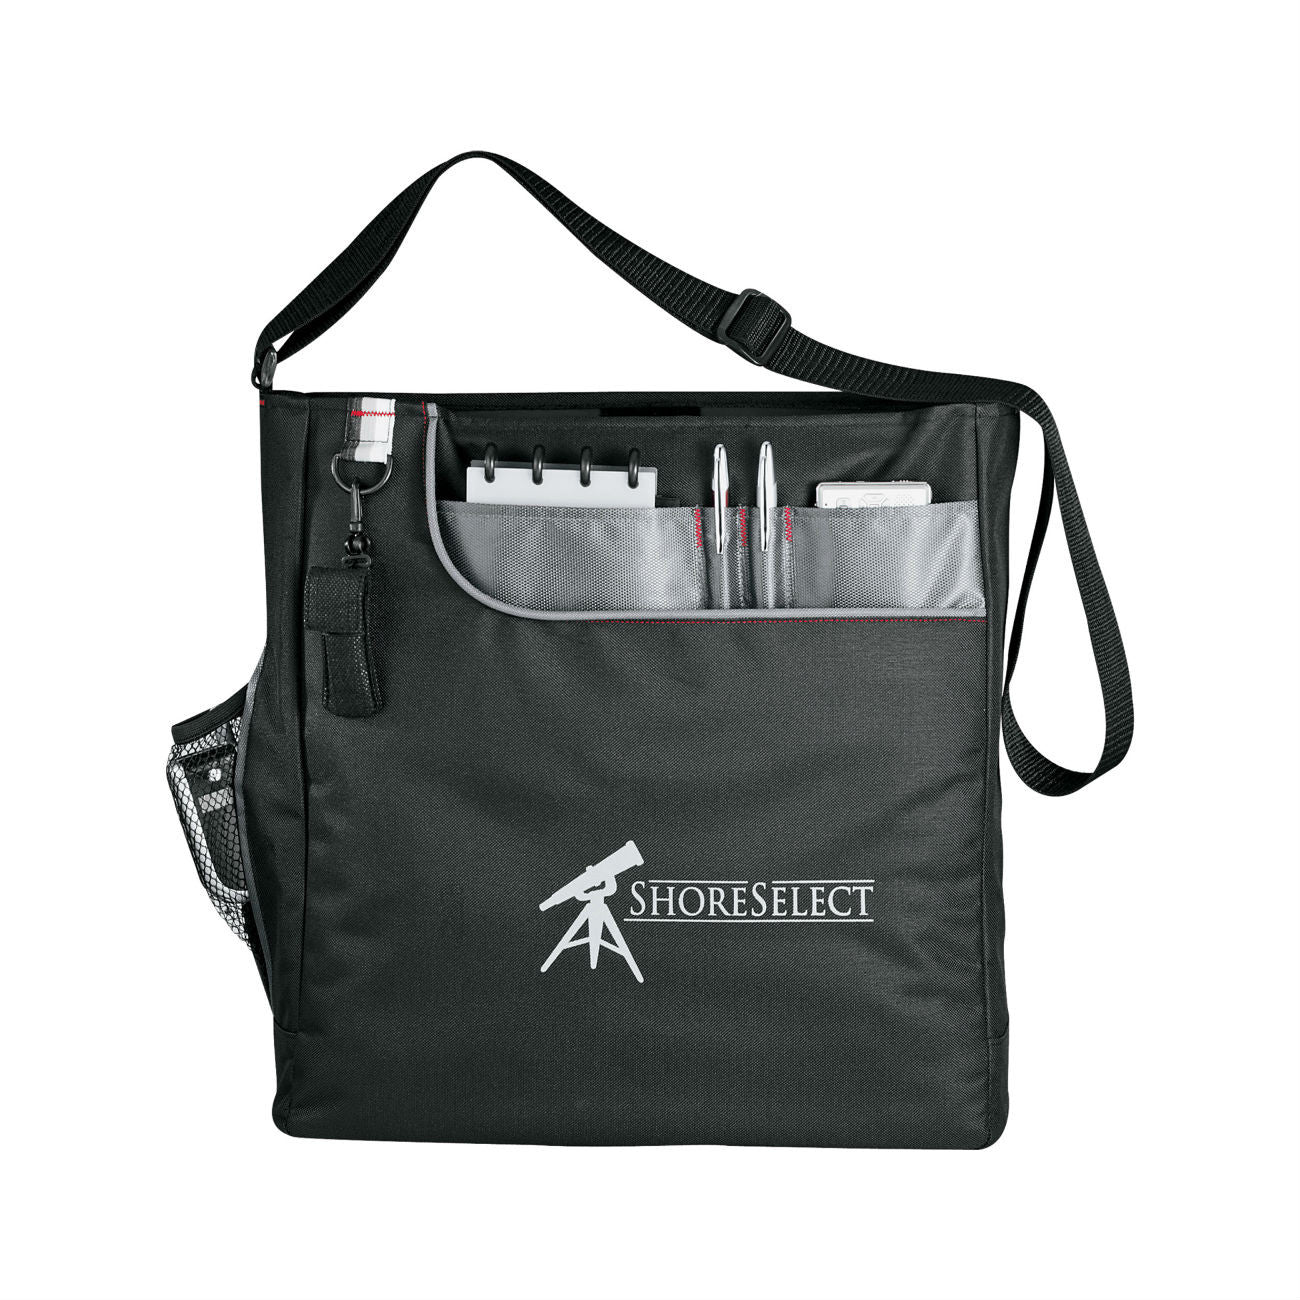 Conference and Convention Tote Bags-Custom Meeting Bags - PROMOrx